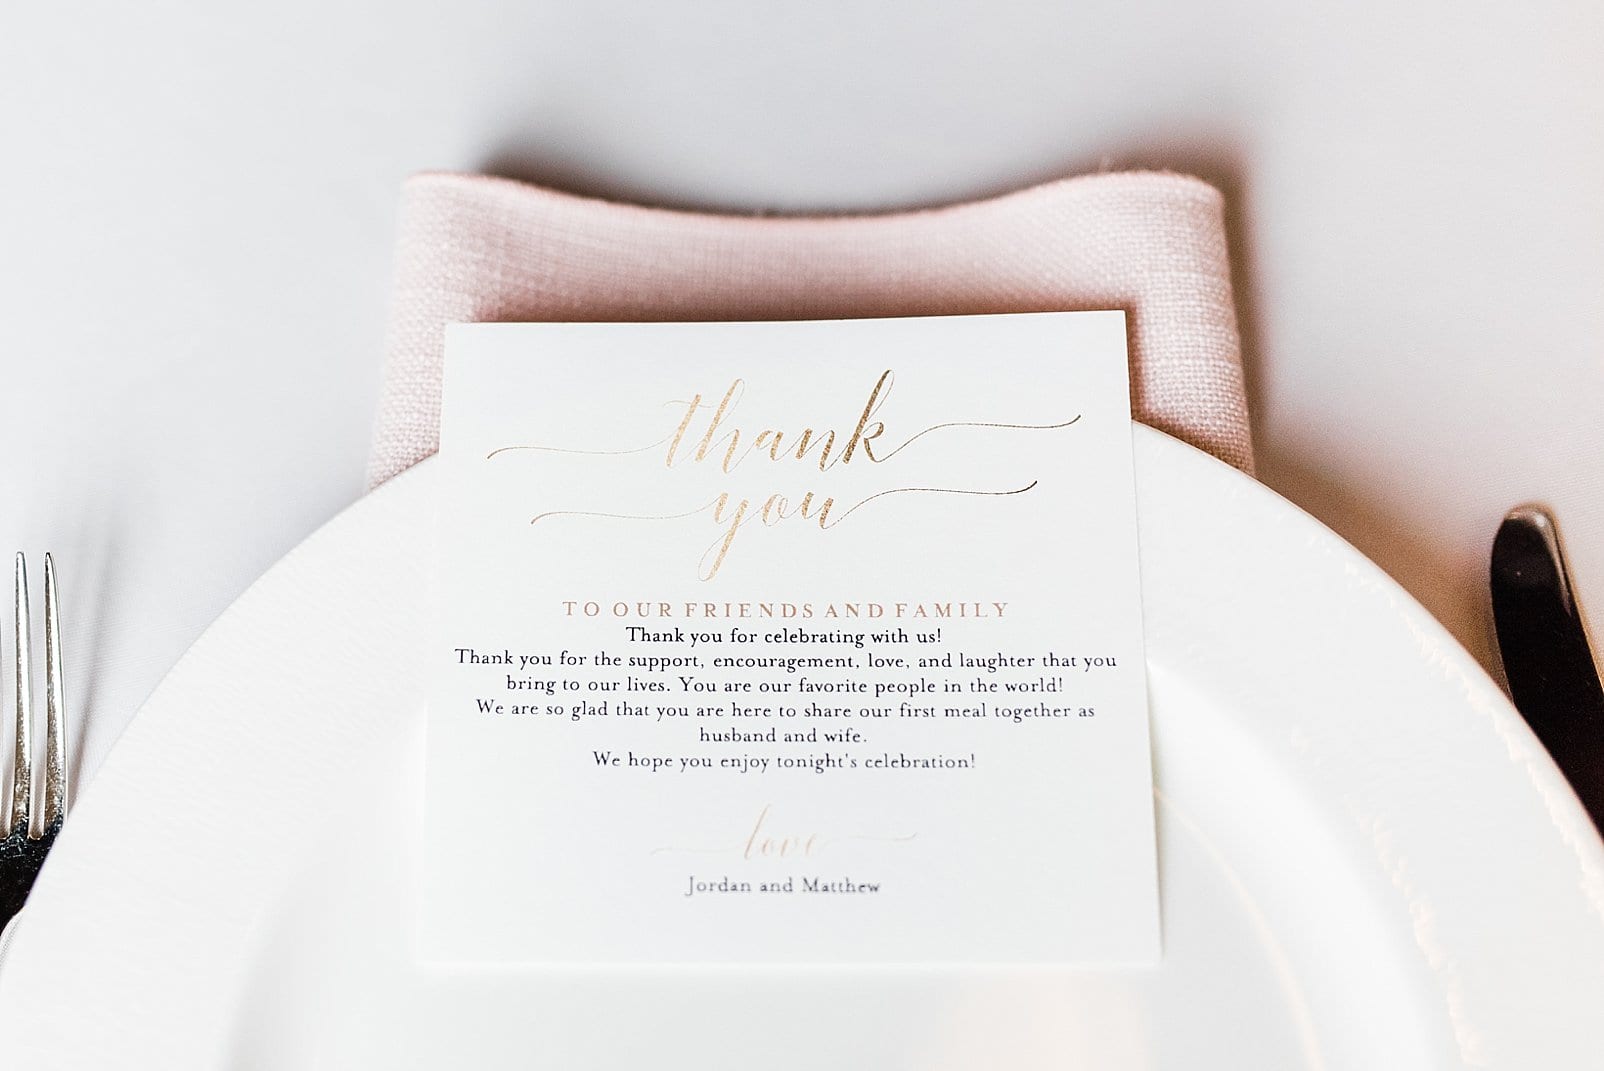 raleigh, nc reception thank you card from bride and groom photo